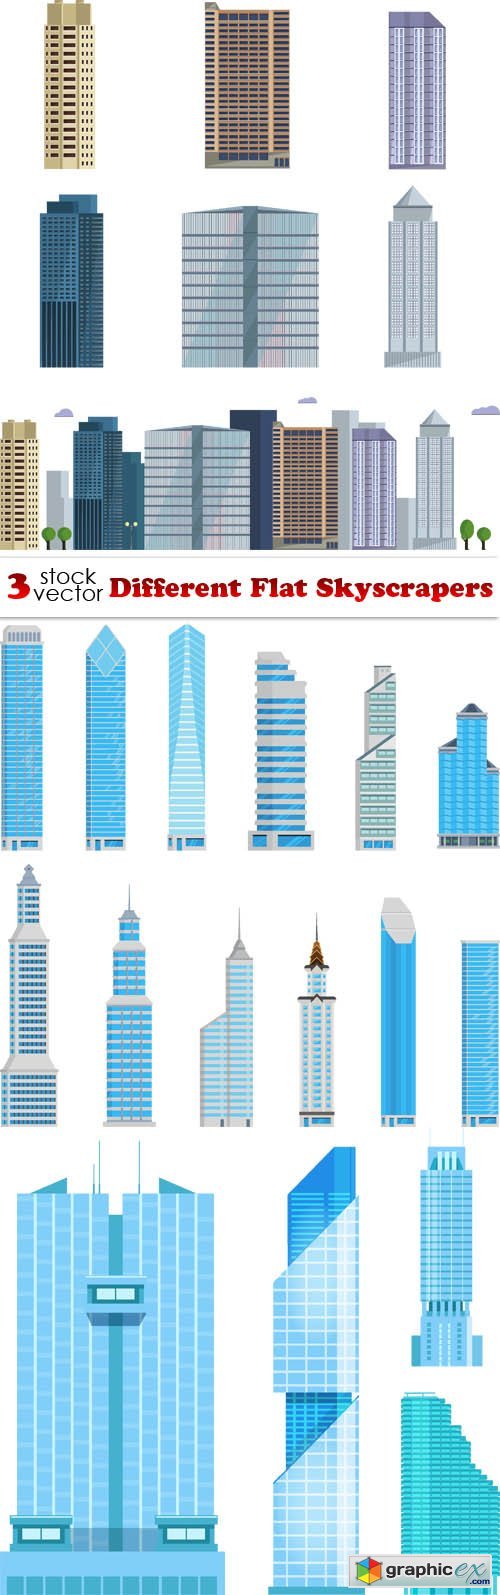 Different Flat Skyscrapers